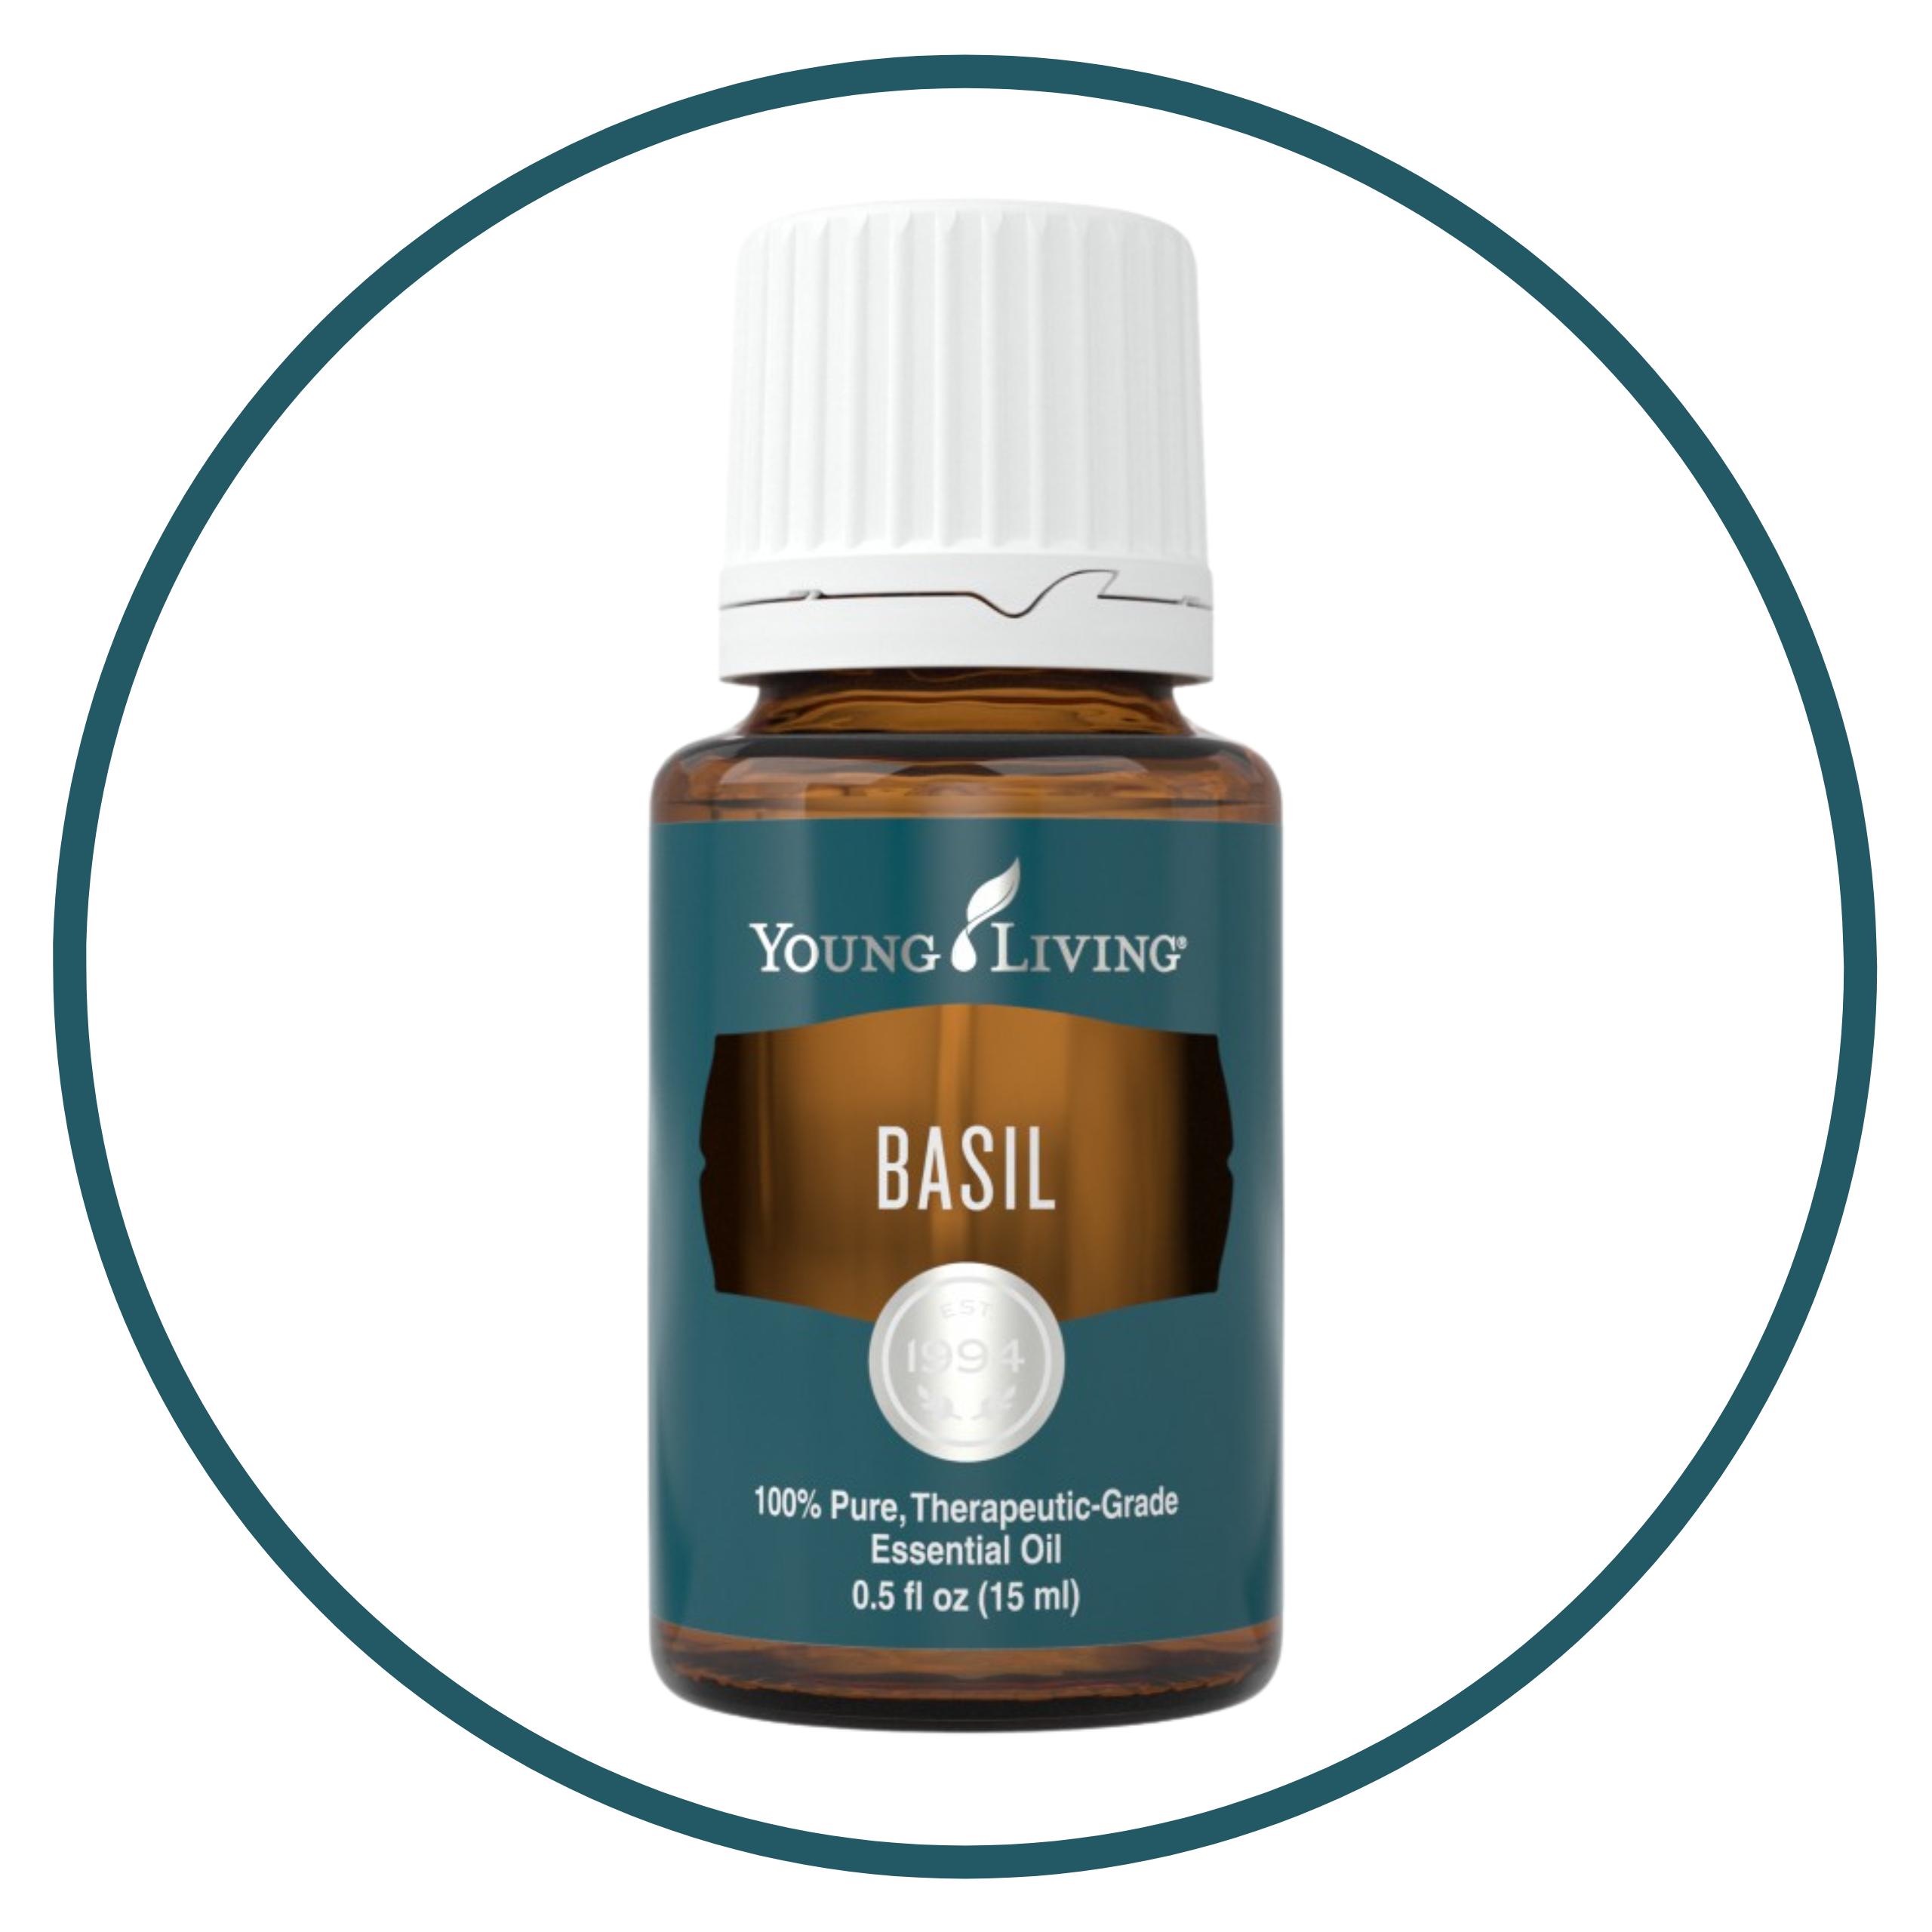 Image of Young Living 'Basil' essential oil bottle